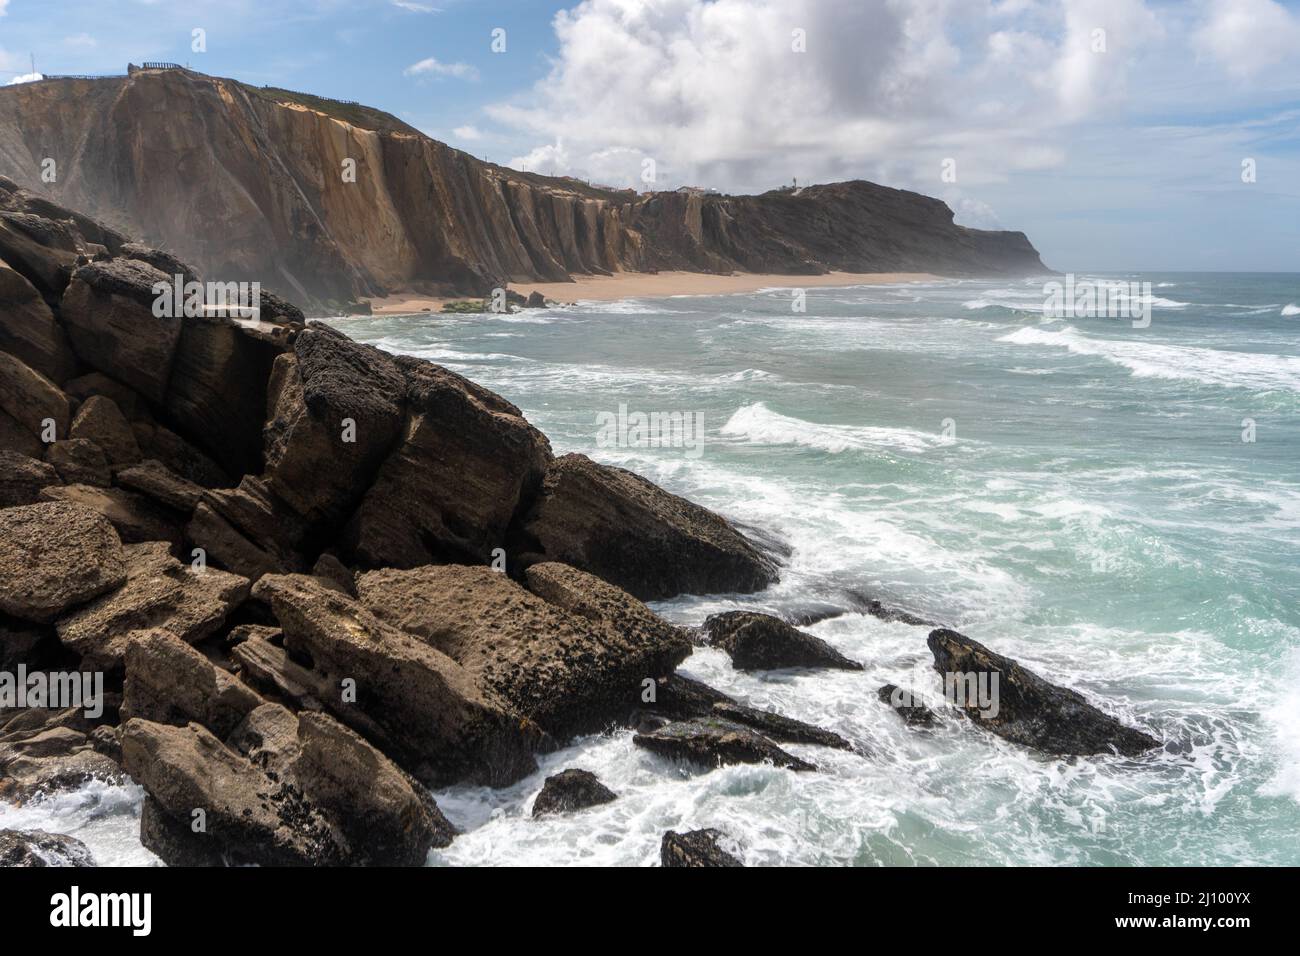 Formosa beach in Santa Cruz with its famous rock cliffs formations at sunset, Portugal. Stock Photo